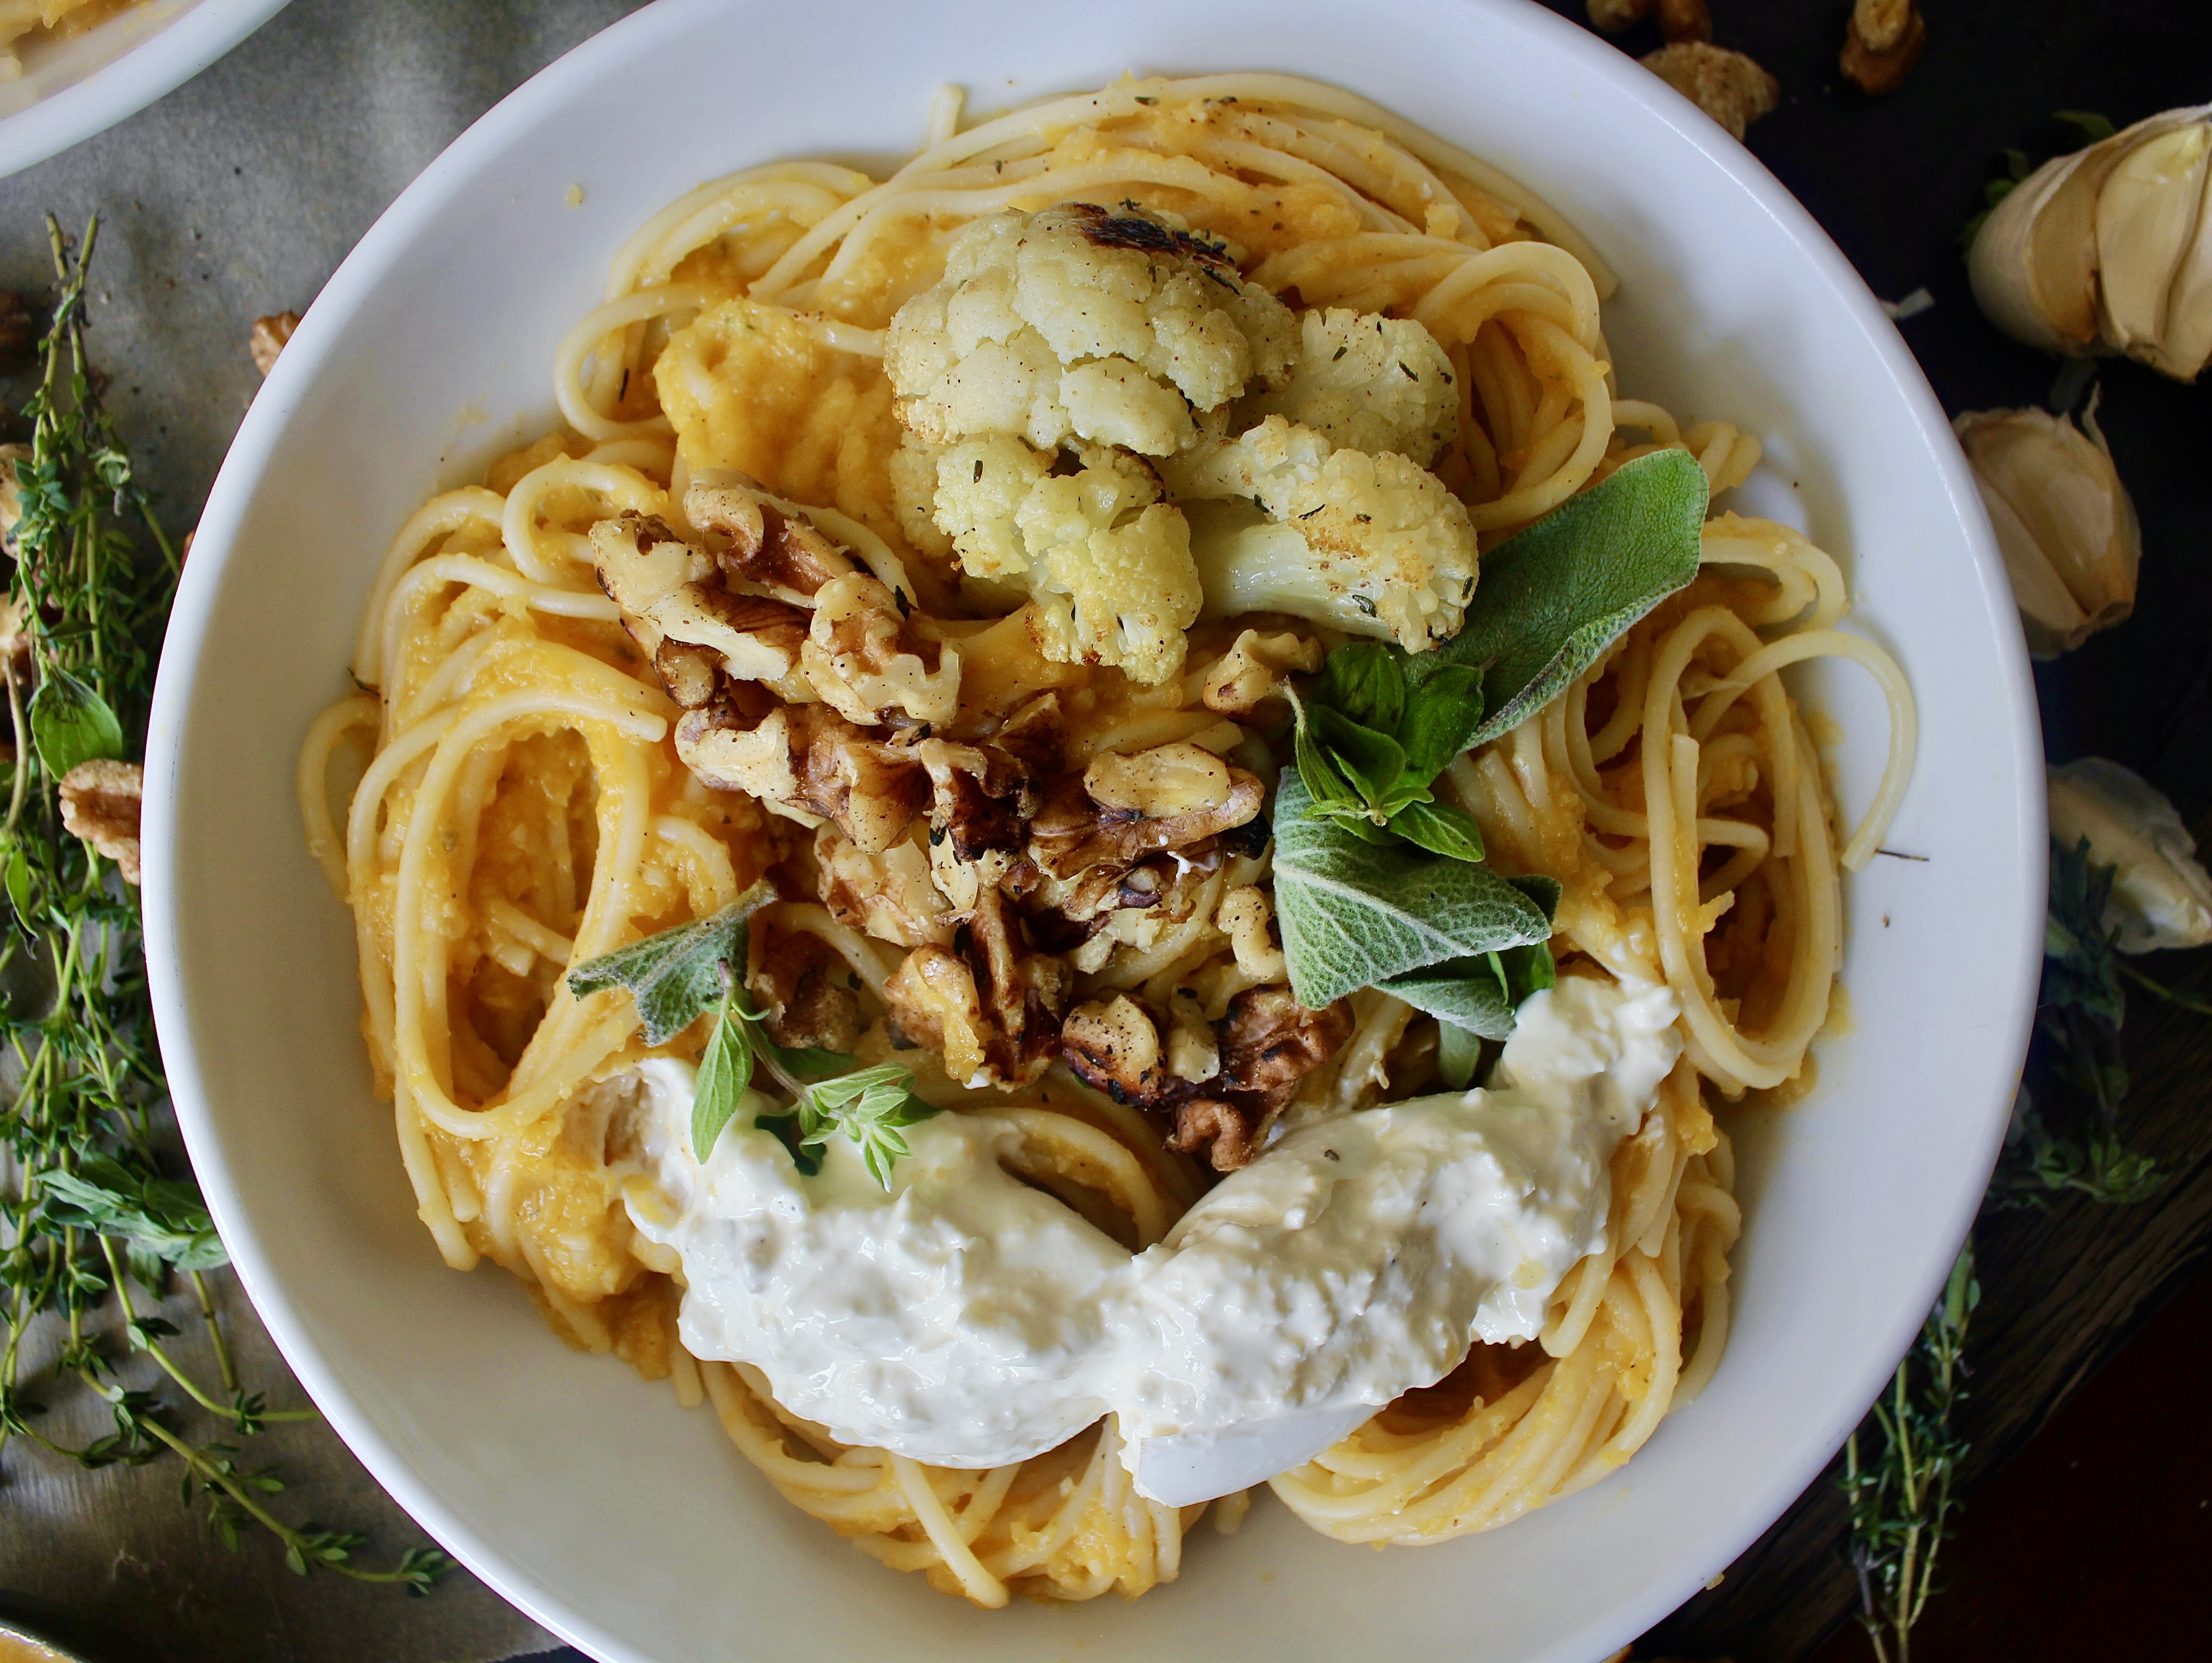 A perfectly roasted caramelized butternut squash sauce with tons of garlic, all the seasonings, and plenty of parmesan cheese all tossed with spaghetti and topped off with crispy cauliflower, creamy burrata, and toasted walnuts: this Creamy Herbed Butternut Squash Spaghetti with Cauliflower and Burrata is truly the pasta of your dreams.